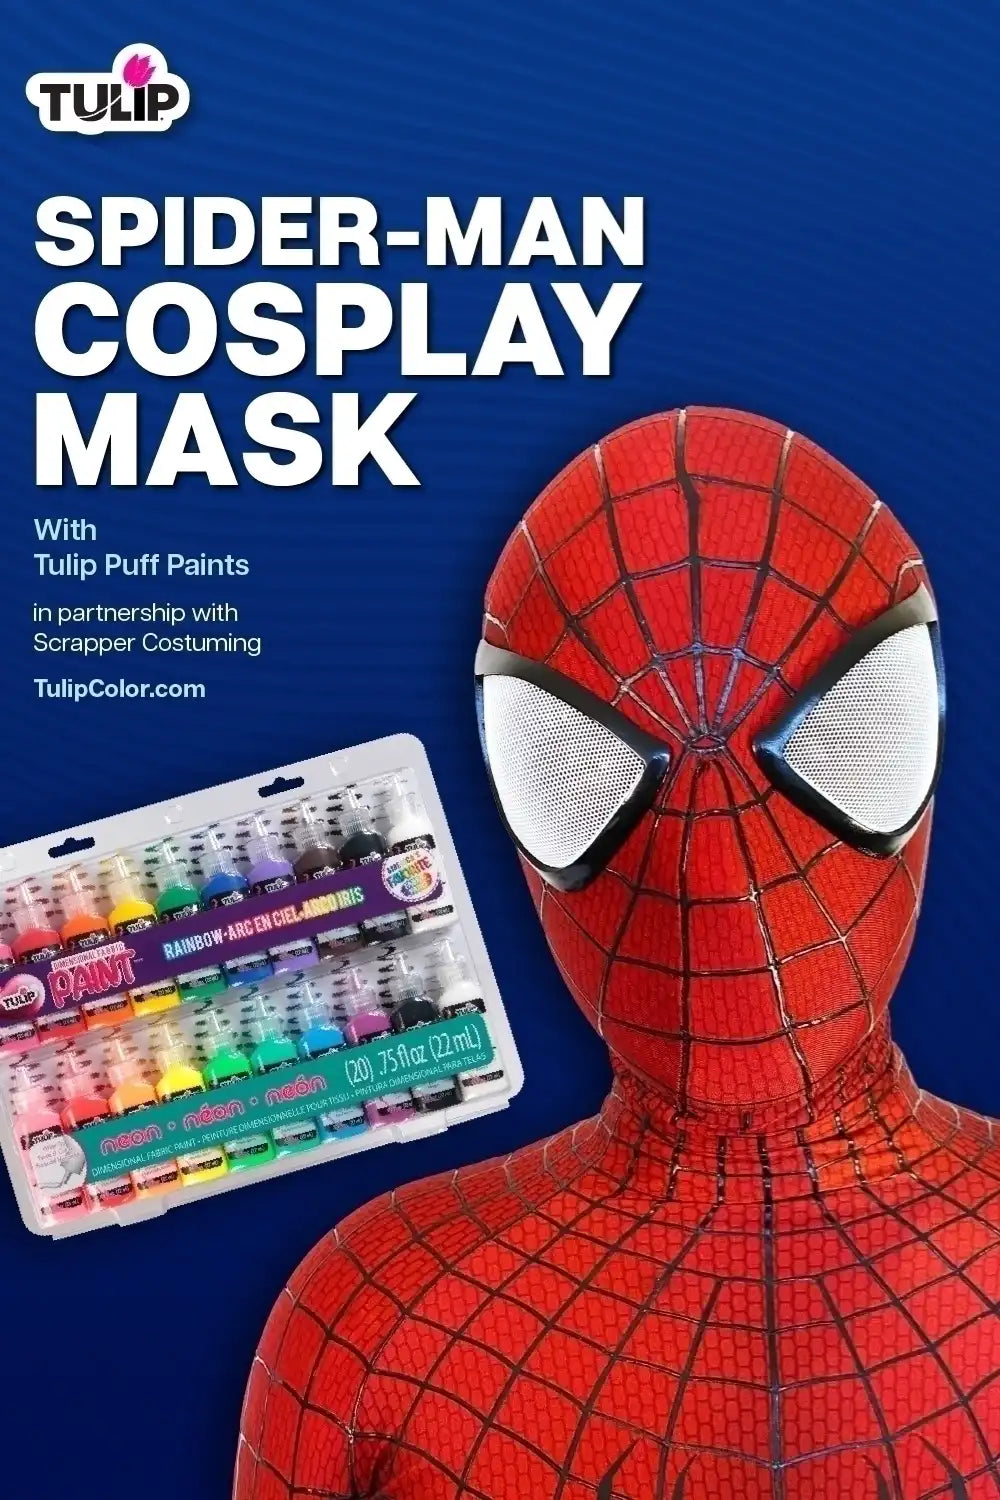 Raised Webbing Spider-Man Cosplay Mask with Puff Paint